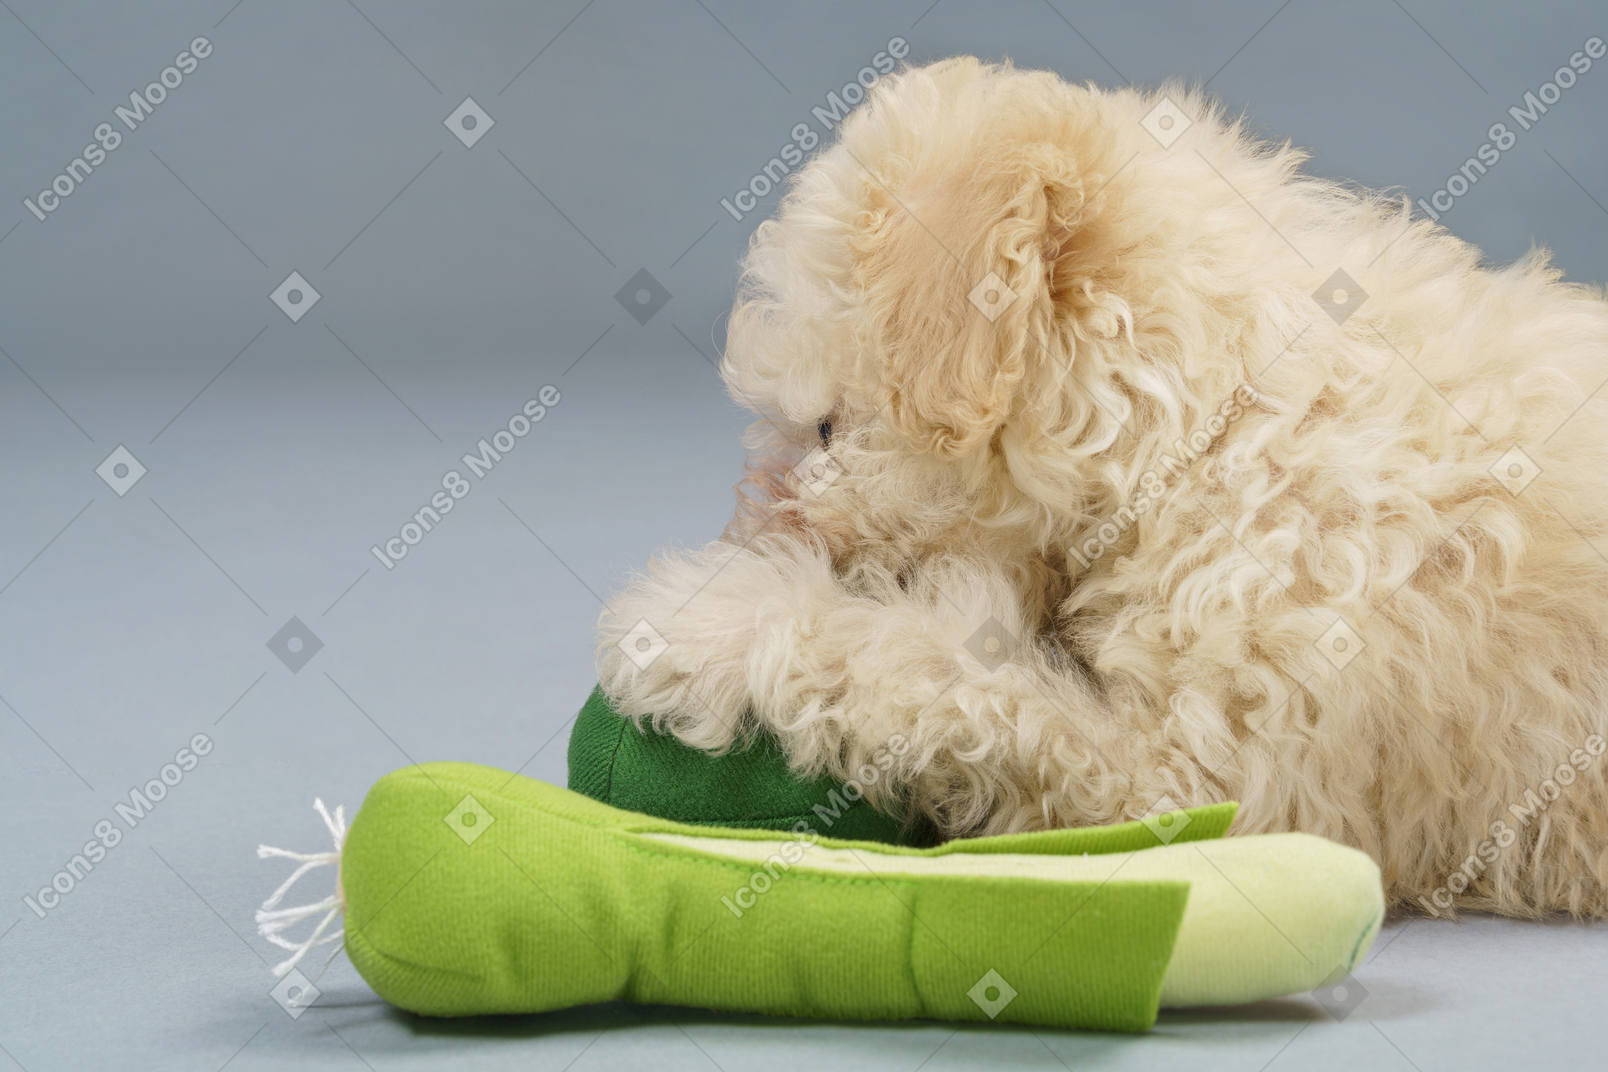 Side view of a tiny white poodle playing with toy vegetables